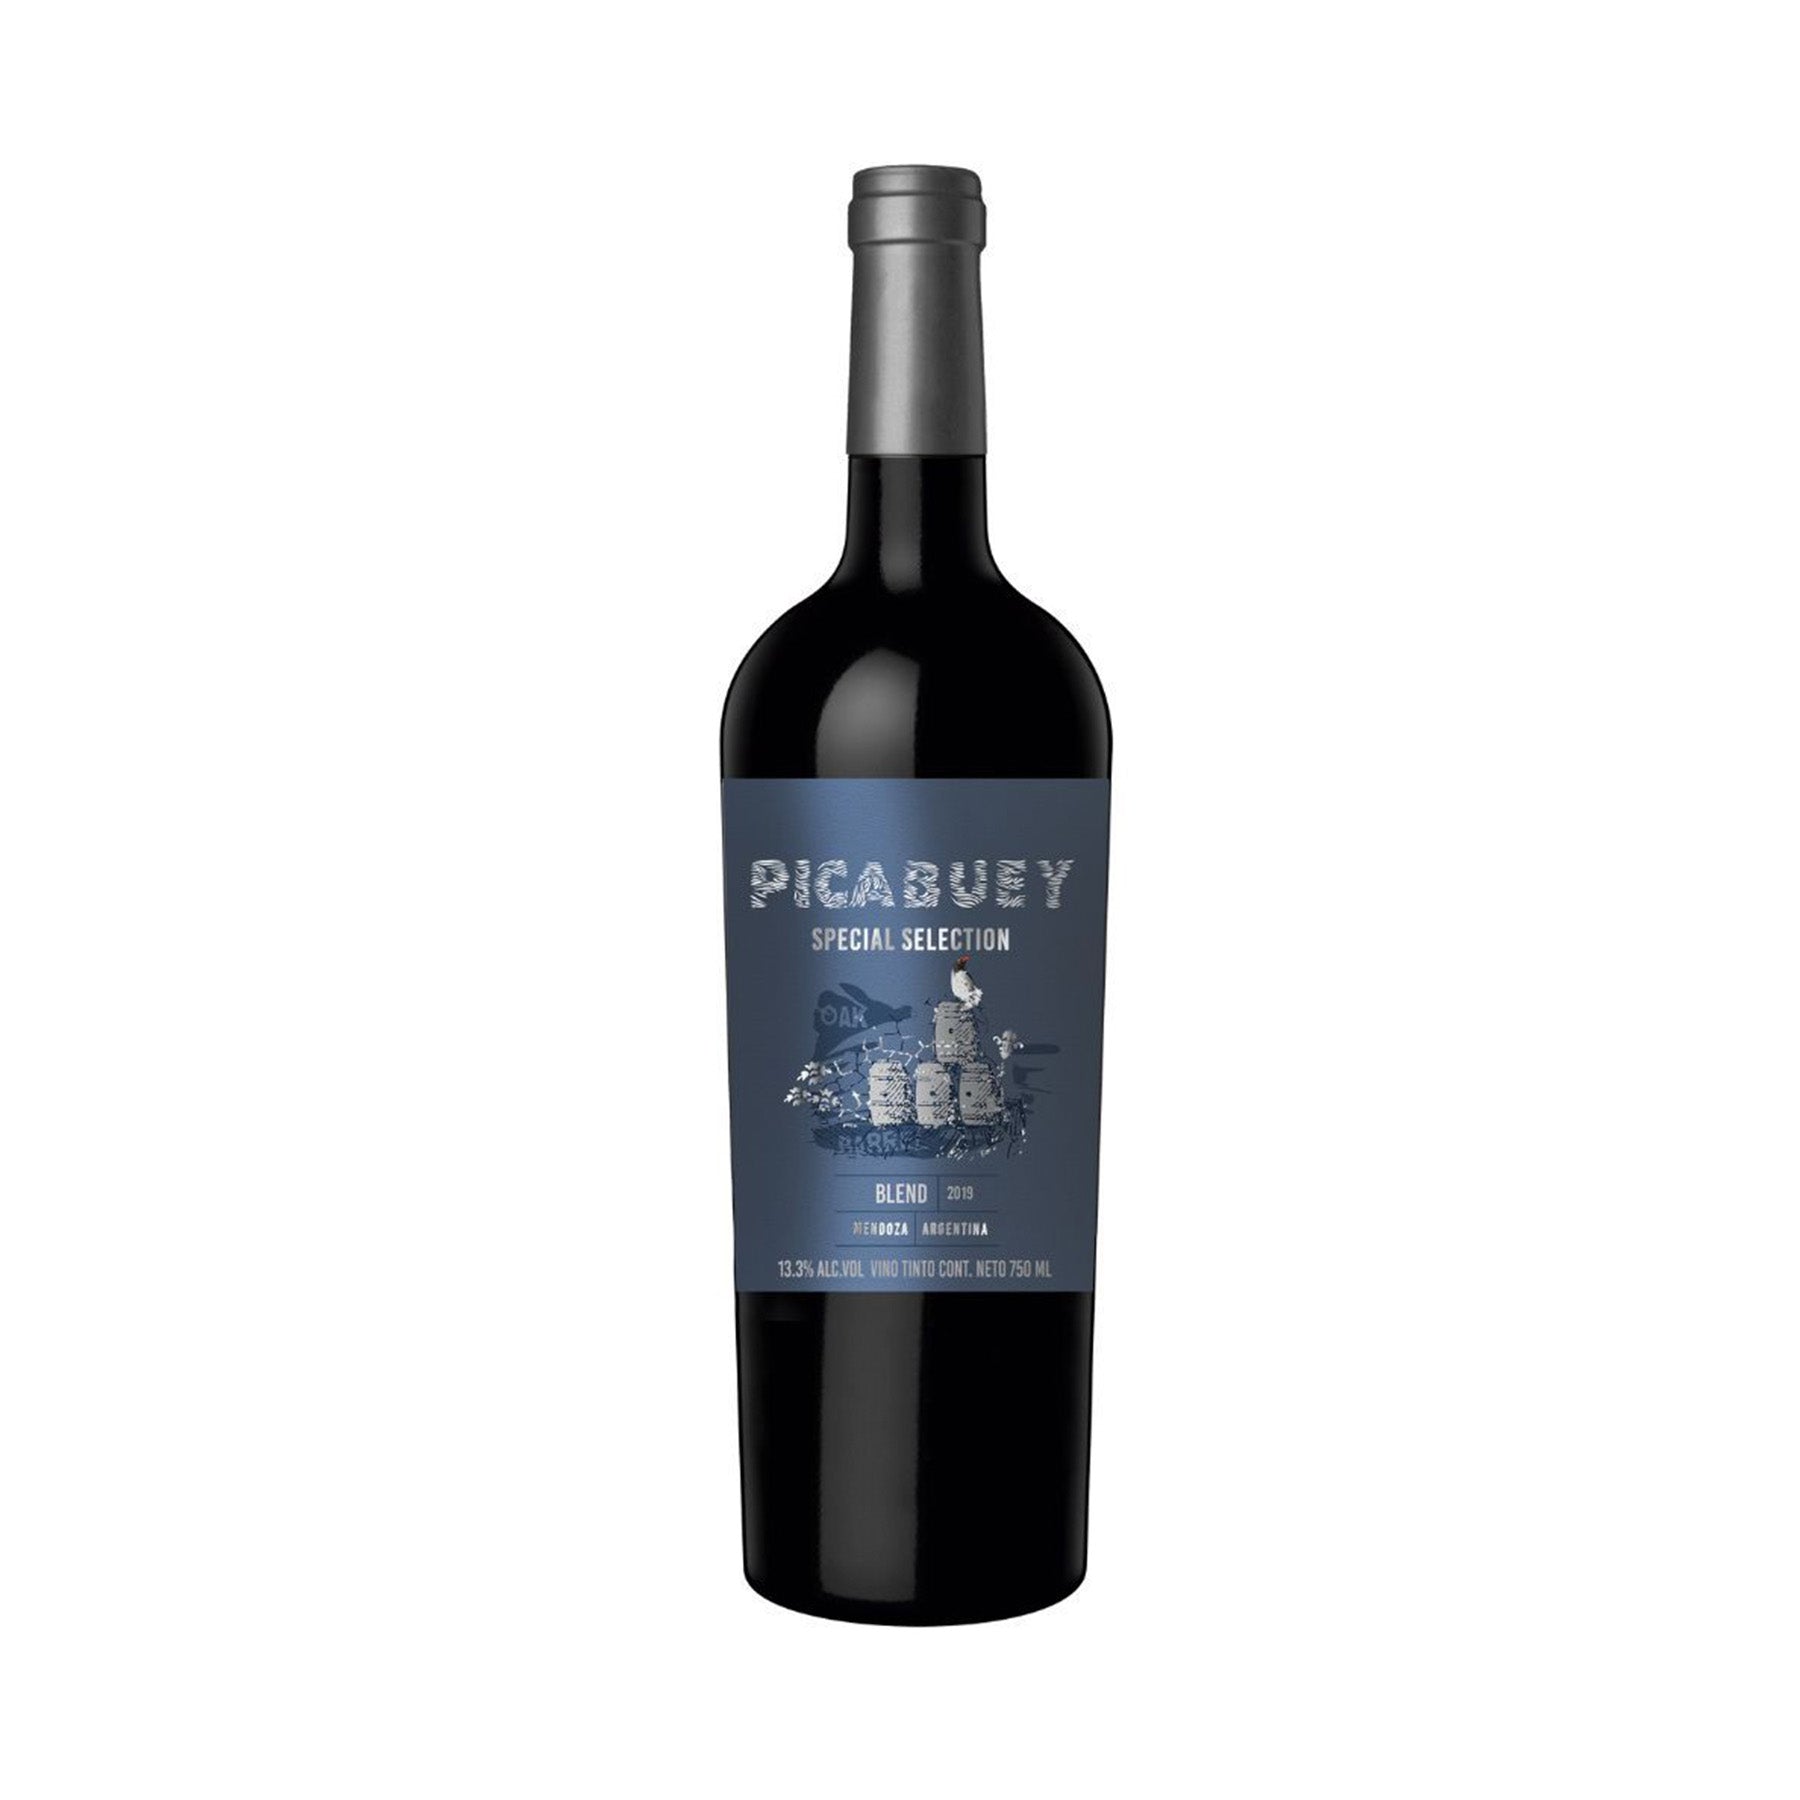 PICABUEY SPECIAL SELECTION BLEND 750 MLT 13.3%